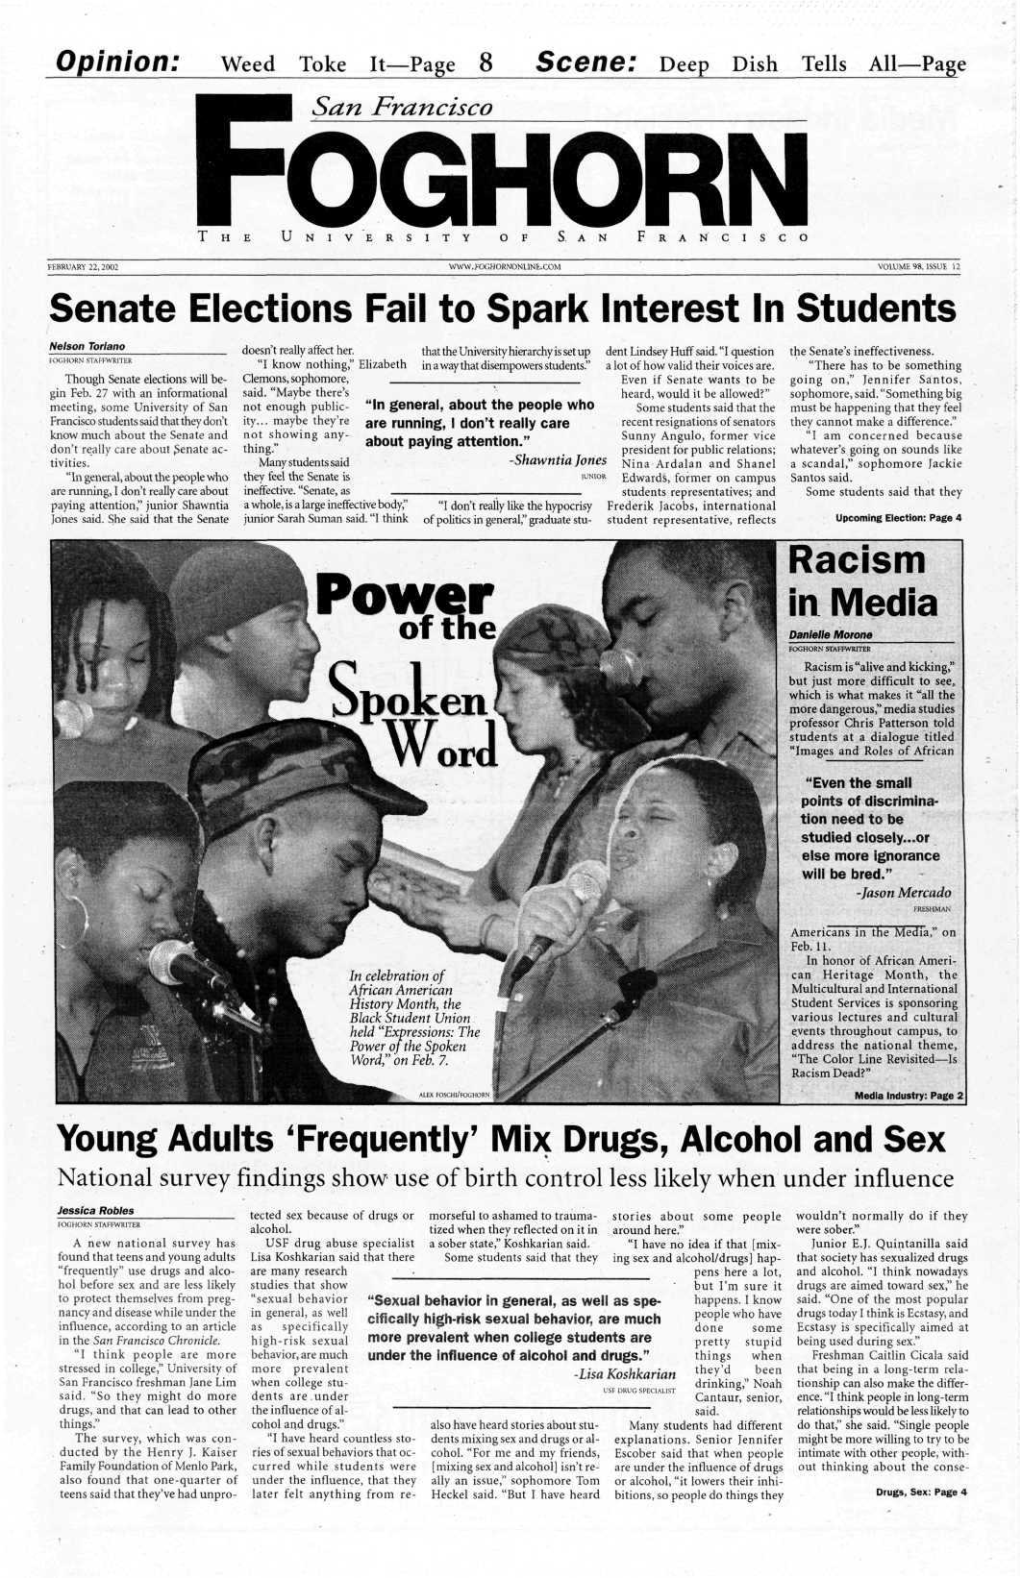 Senate Elections Fail to Spark Interest in Students Racism in Media Young